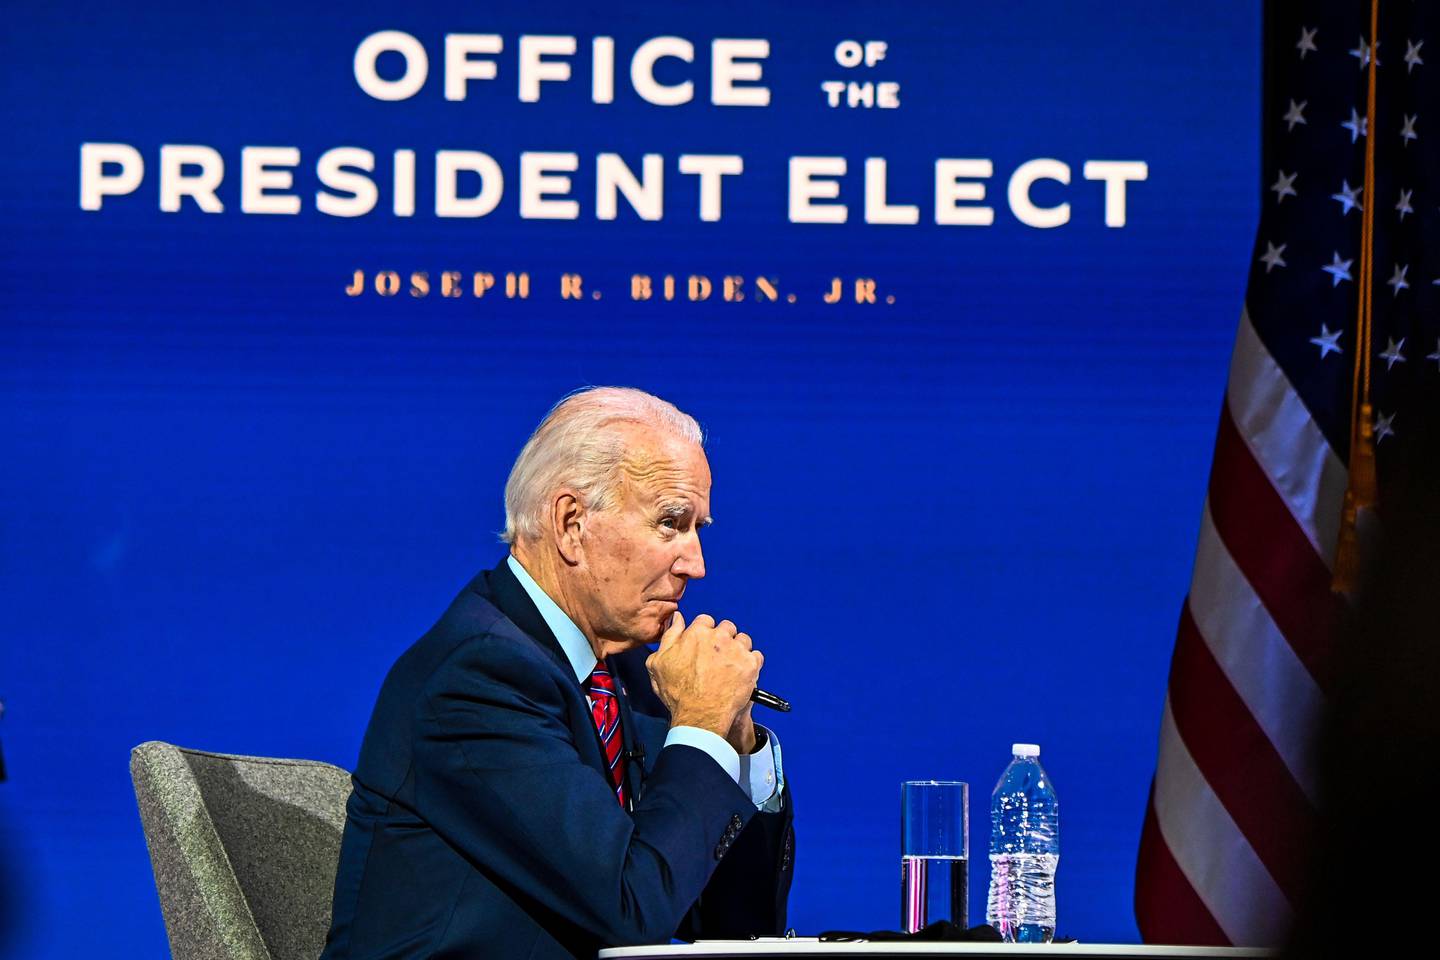 US President-elect Joe Biden participates in a virtual meeting with the United States Conference of Mayors at the  Queen in Wilmington, Delaware, on November 23, 2020. - US President-elect Joe Biden on Monday named the deeply experienced Antony Blinken for secretary of state, also nominating the first female head of intelligence and a czar for climate issues, with a promise to a return to expertise after the turbulent years of Donald Trump. (Photo by CHANDAN KHANNA / AFP)